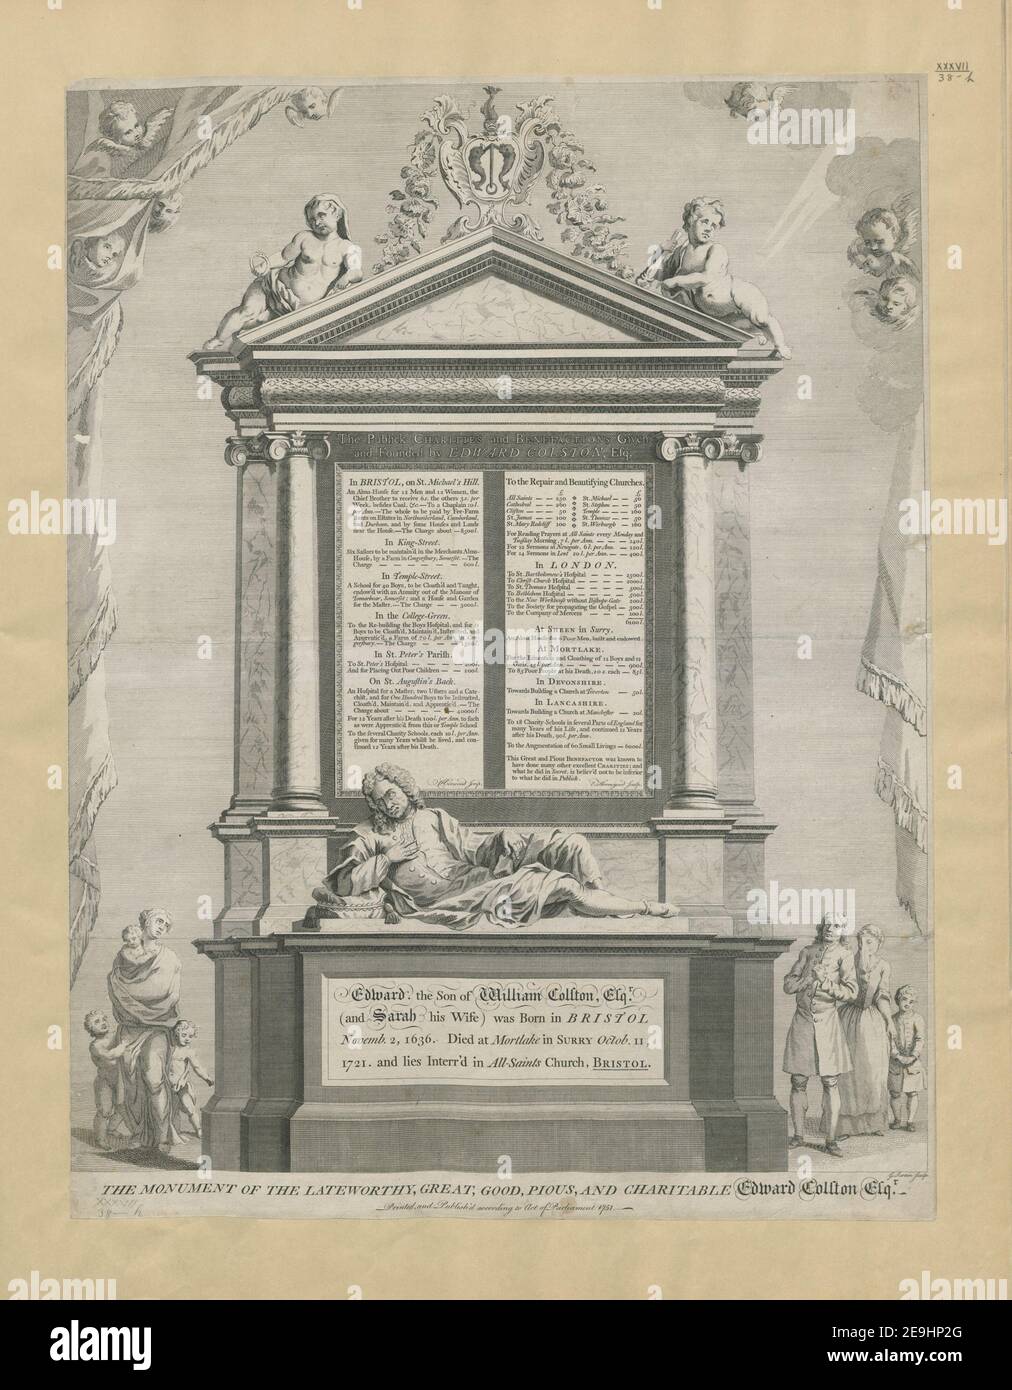 THE MONUMENT OF THE LATEWORTHY, GREAT, GOOD, PIOUS, AND CHARItabLE EDWARD COLTON ESQR.  Author  Scotin, GeÃÅrard Jean Baptiste 37.38.h. Place of publication: [London] Publisher: Printed, and Publish'd according to Act of Parliament., Date of publication: 1751.  Item type: 1 print Medium: etching and engraving Dimensions: sheet 58.2 x 44.1 cm platemark; sheet  Former owner: George III, King of Great Britain, 1738-1820 Stock Photo